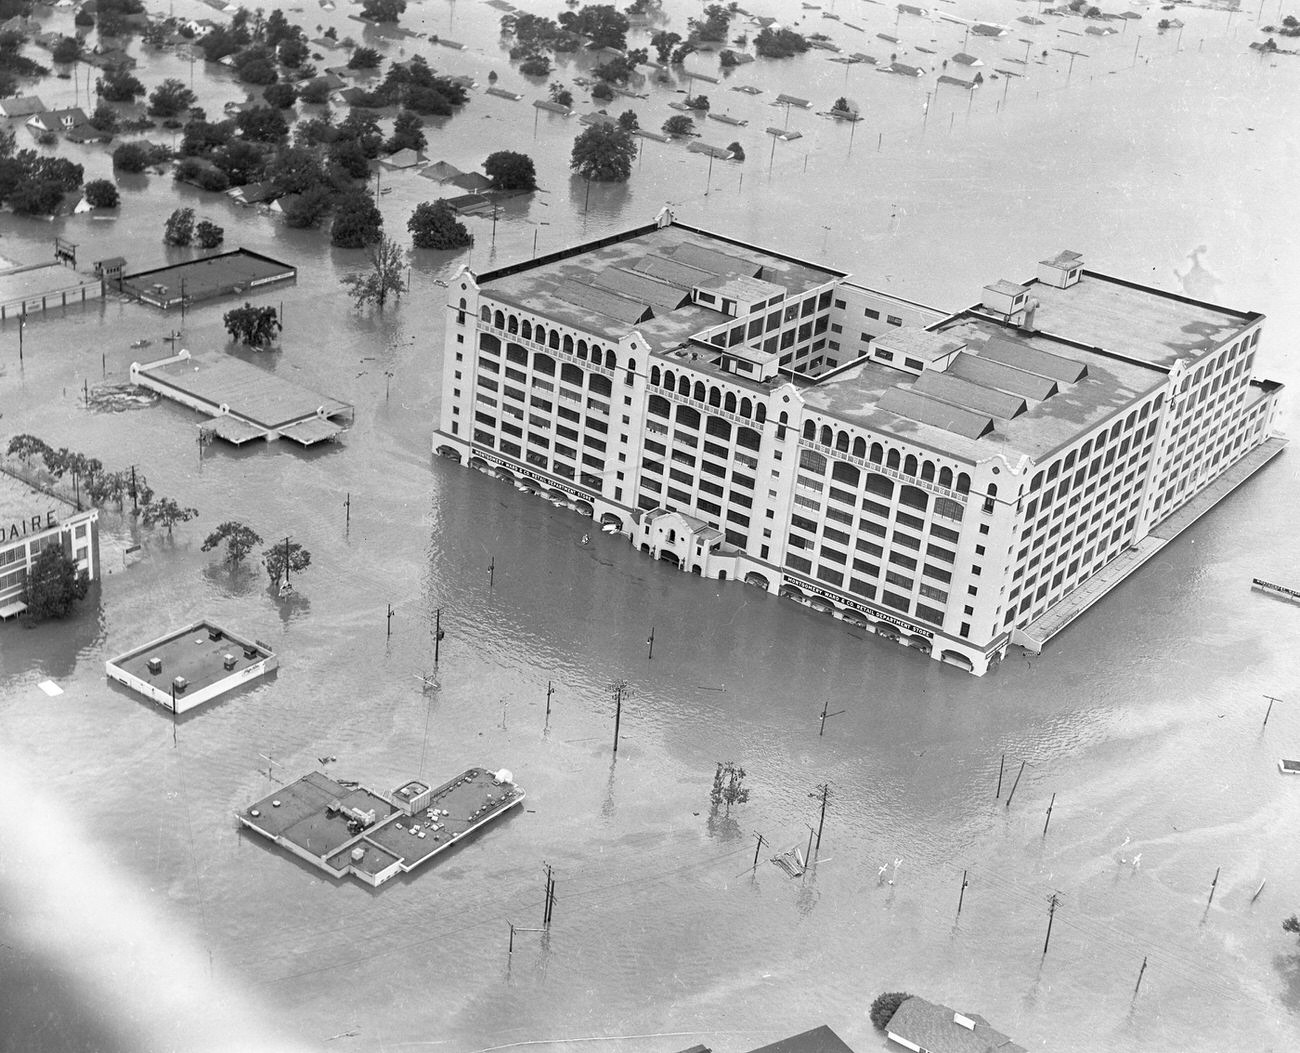 Fort Worth flood of 1949 showing 7th Street under water.